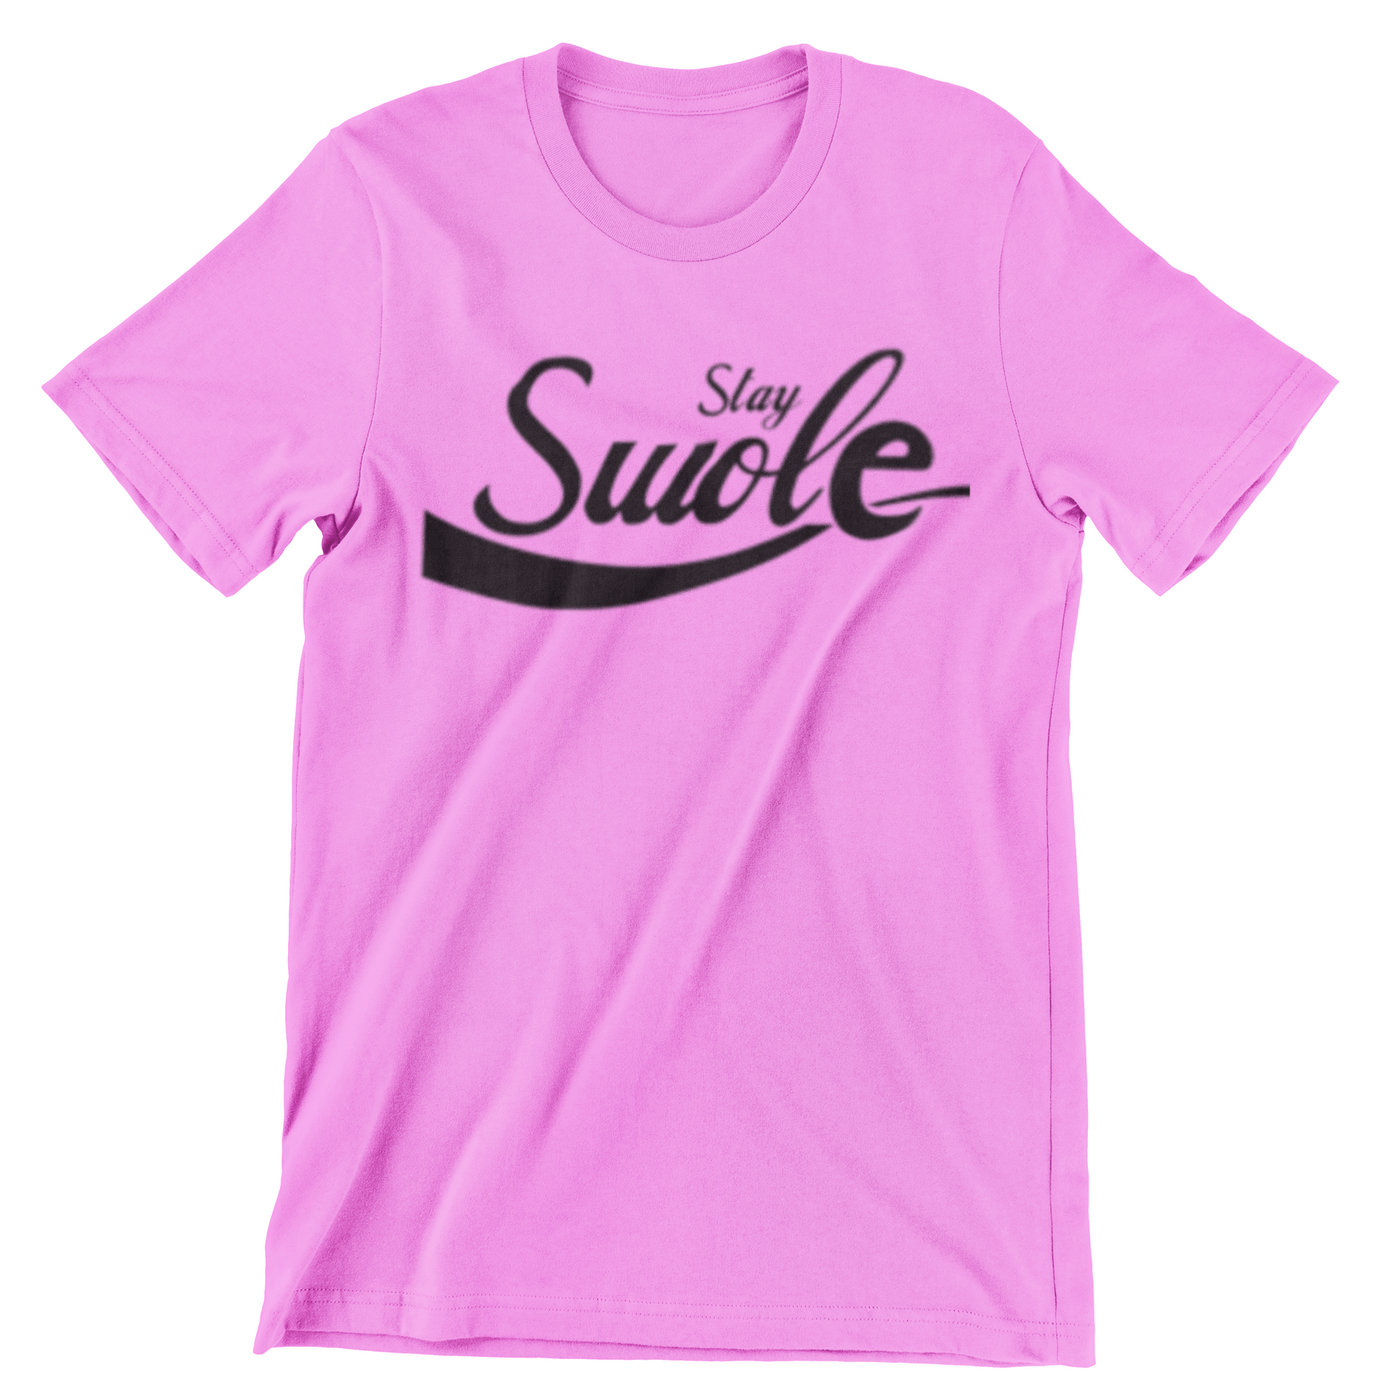 Stay Swole Shirt ( Limited Edition )